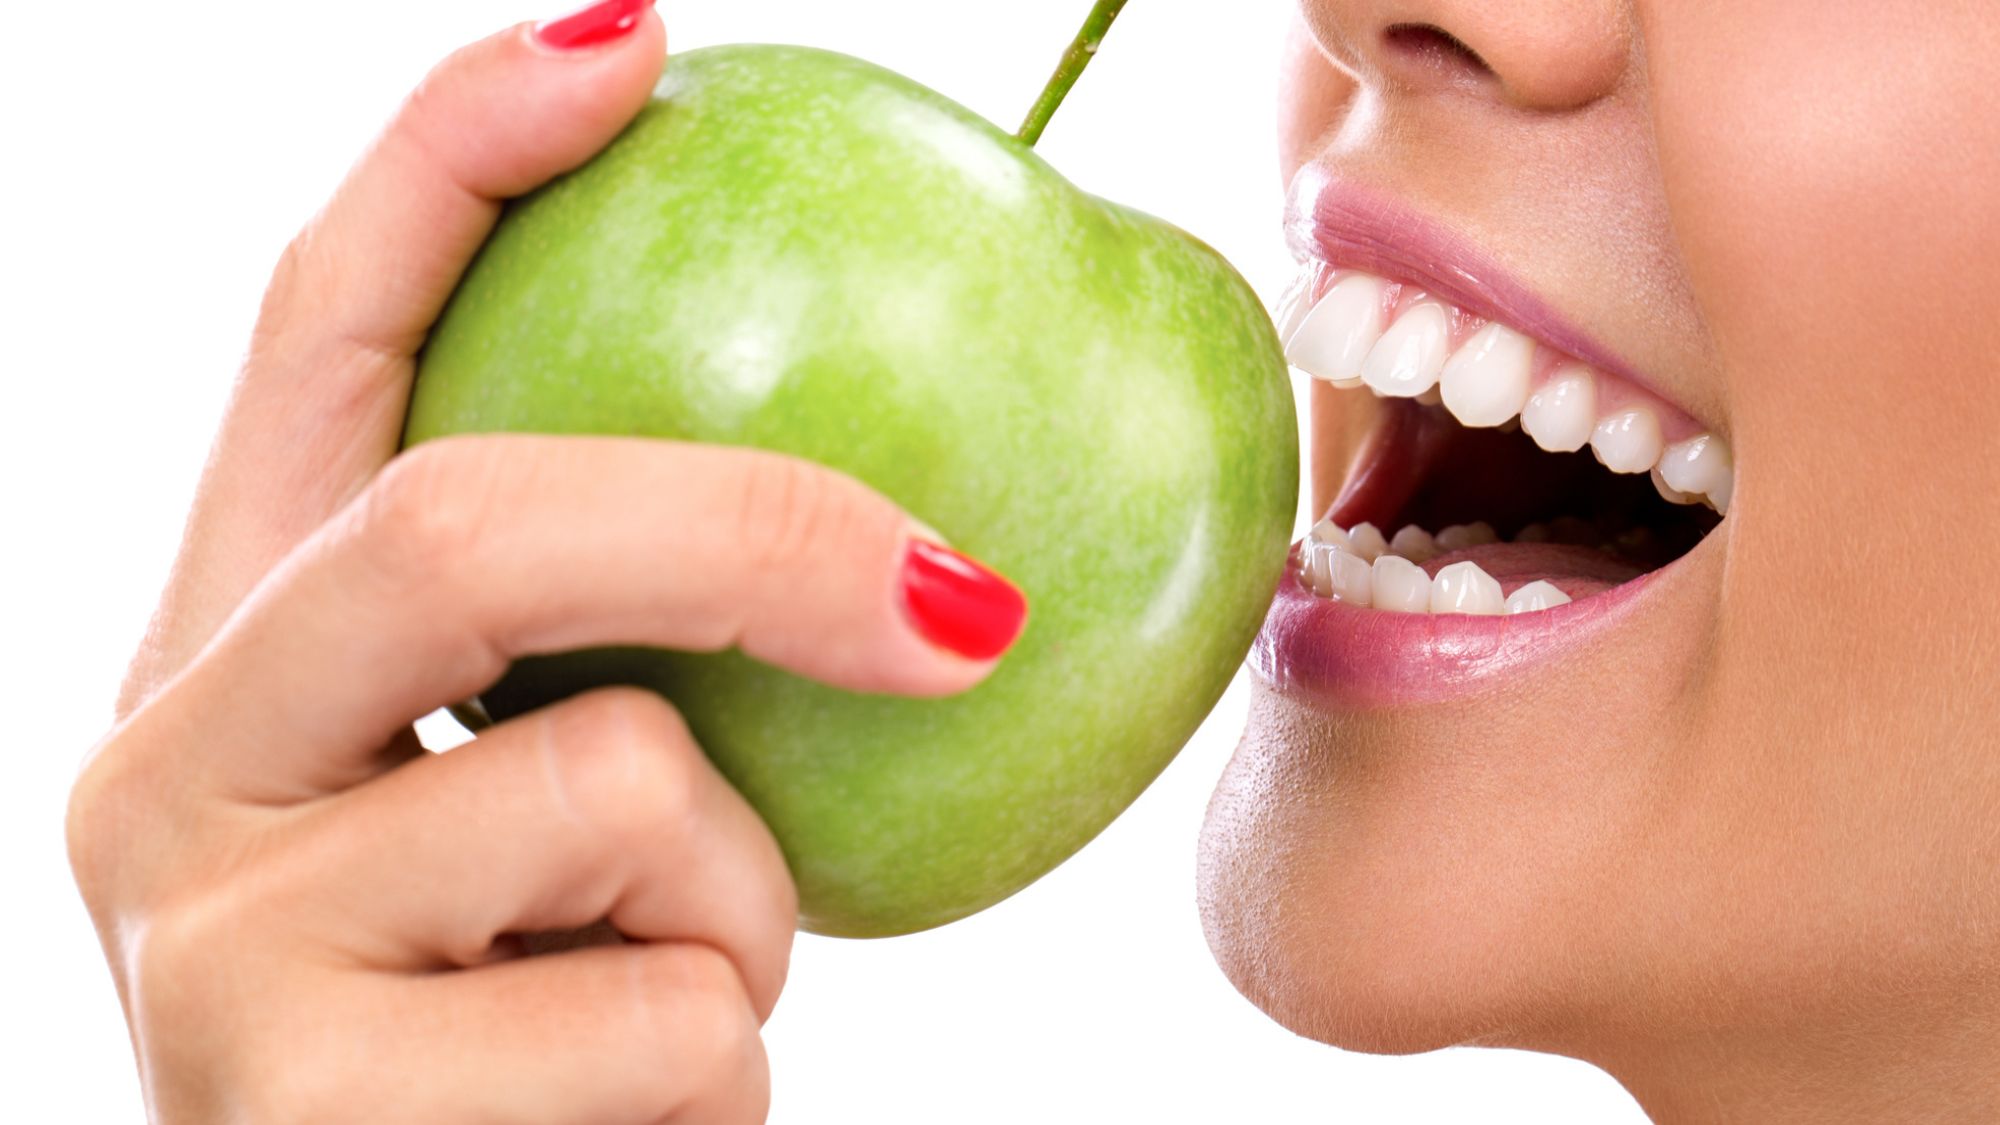 A girl eating green apple - picture related to connection between mouth larva and different oral parasites